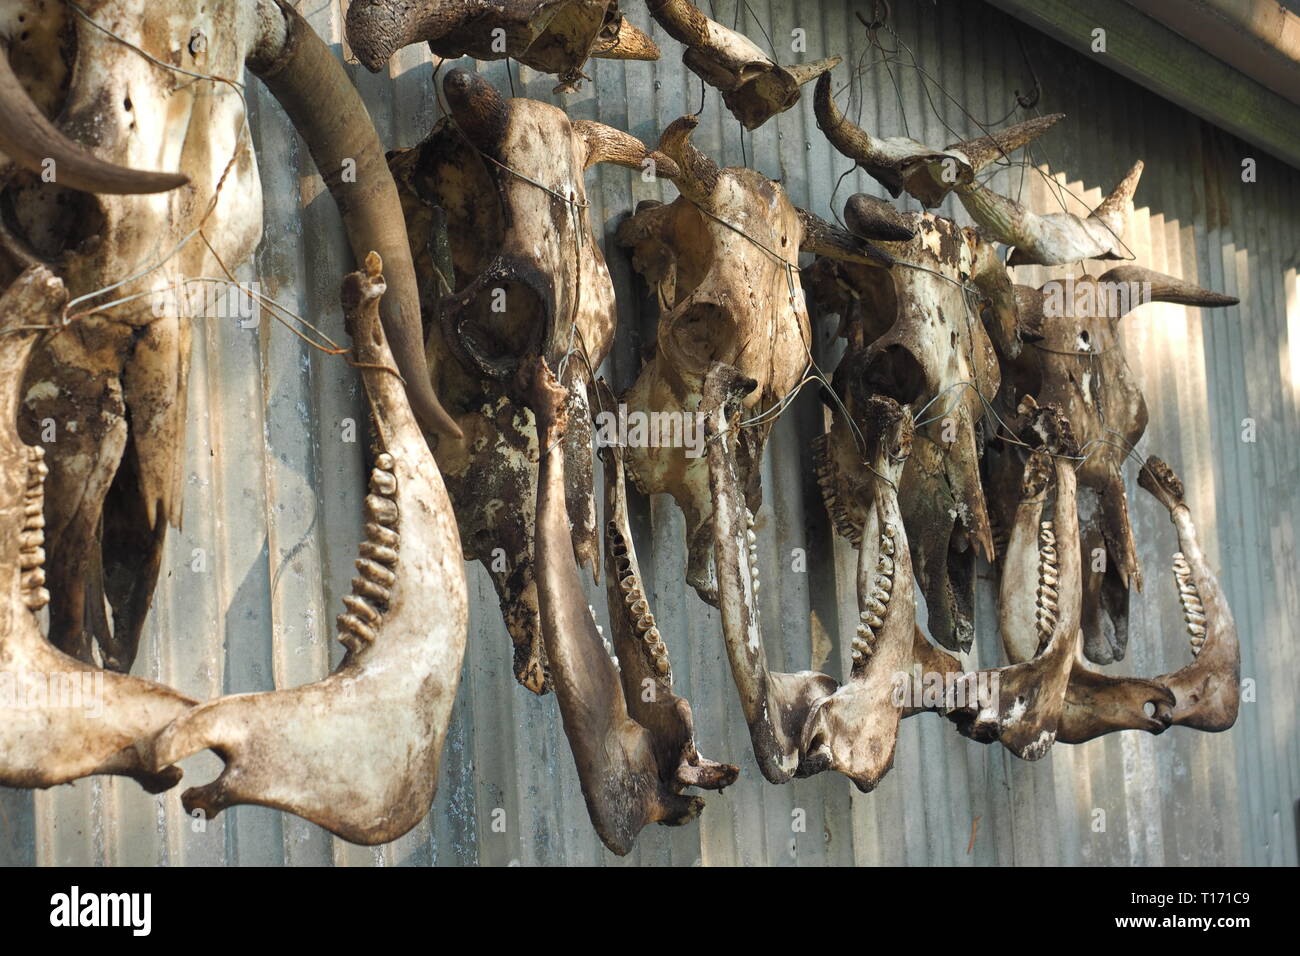 Skulls of cows hanging on a shed wall. The gruesome scene shows cow or bull skulls hanging out to dry after the meat and skin has been removed. Stock Photo